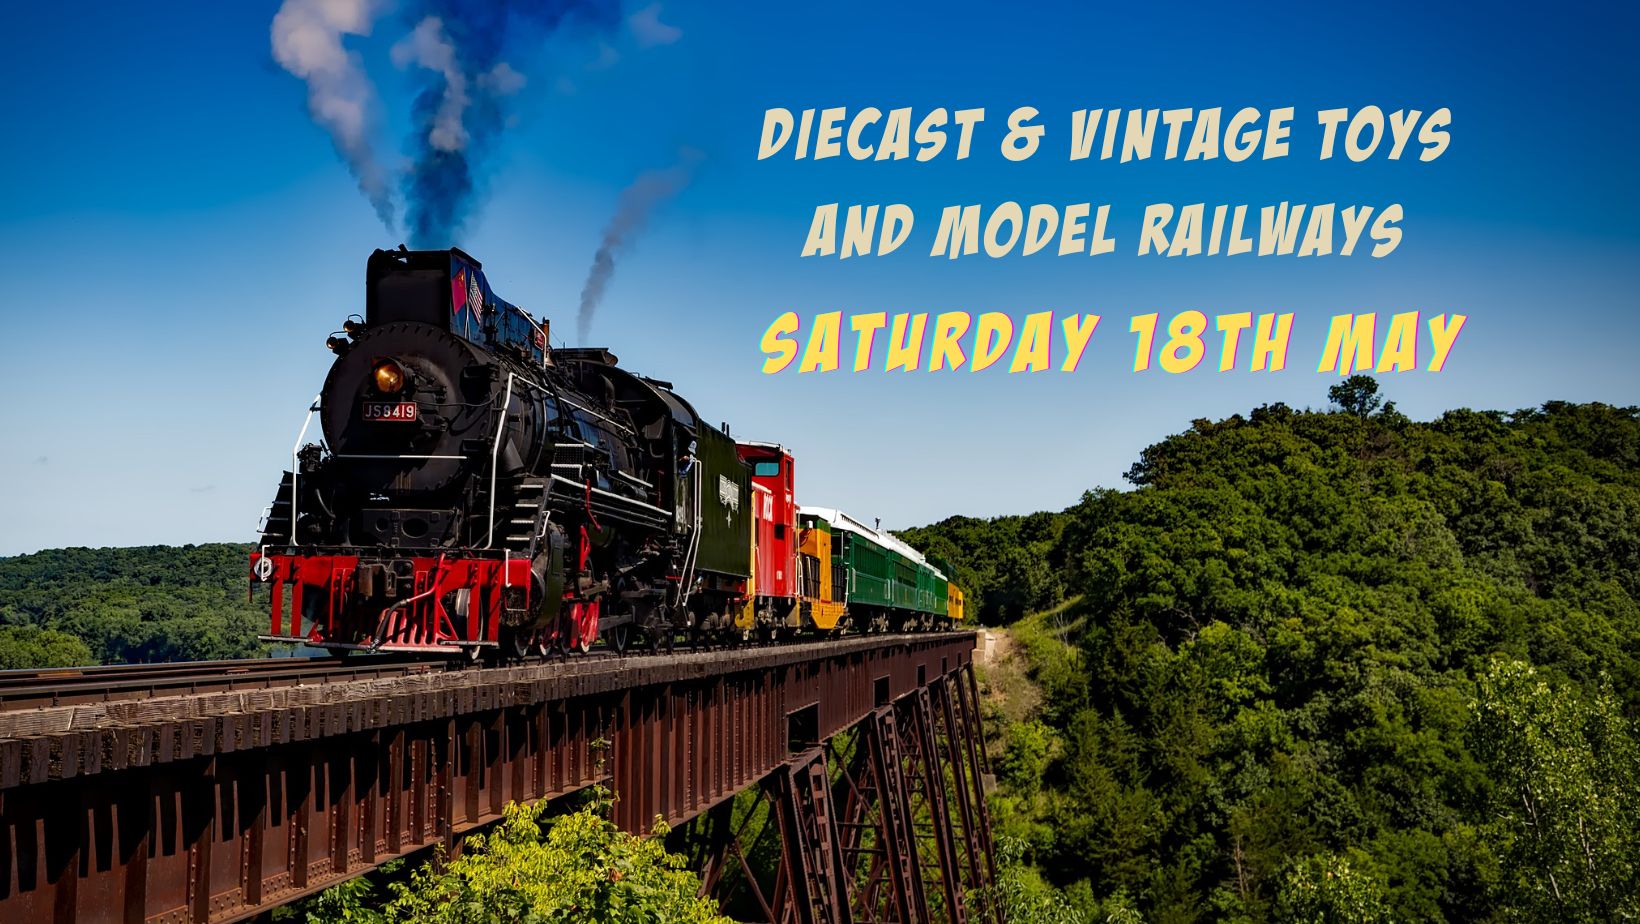 Diecast & Vintage Toys and Model Railway Collectors Sale